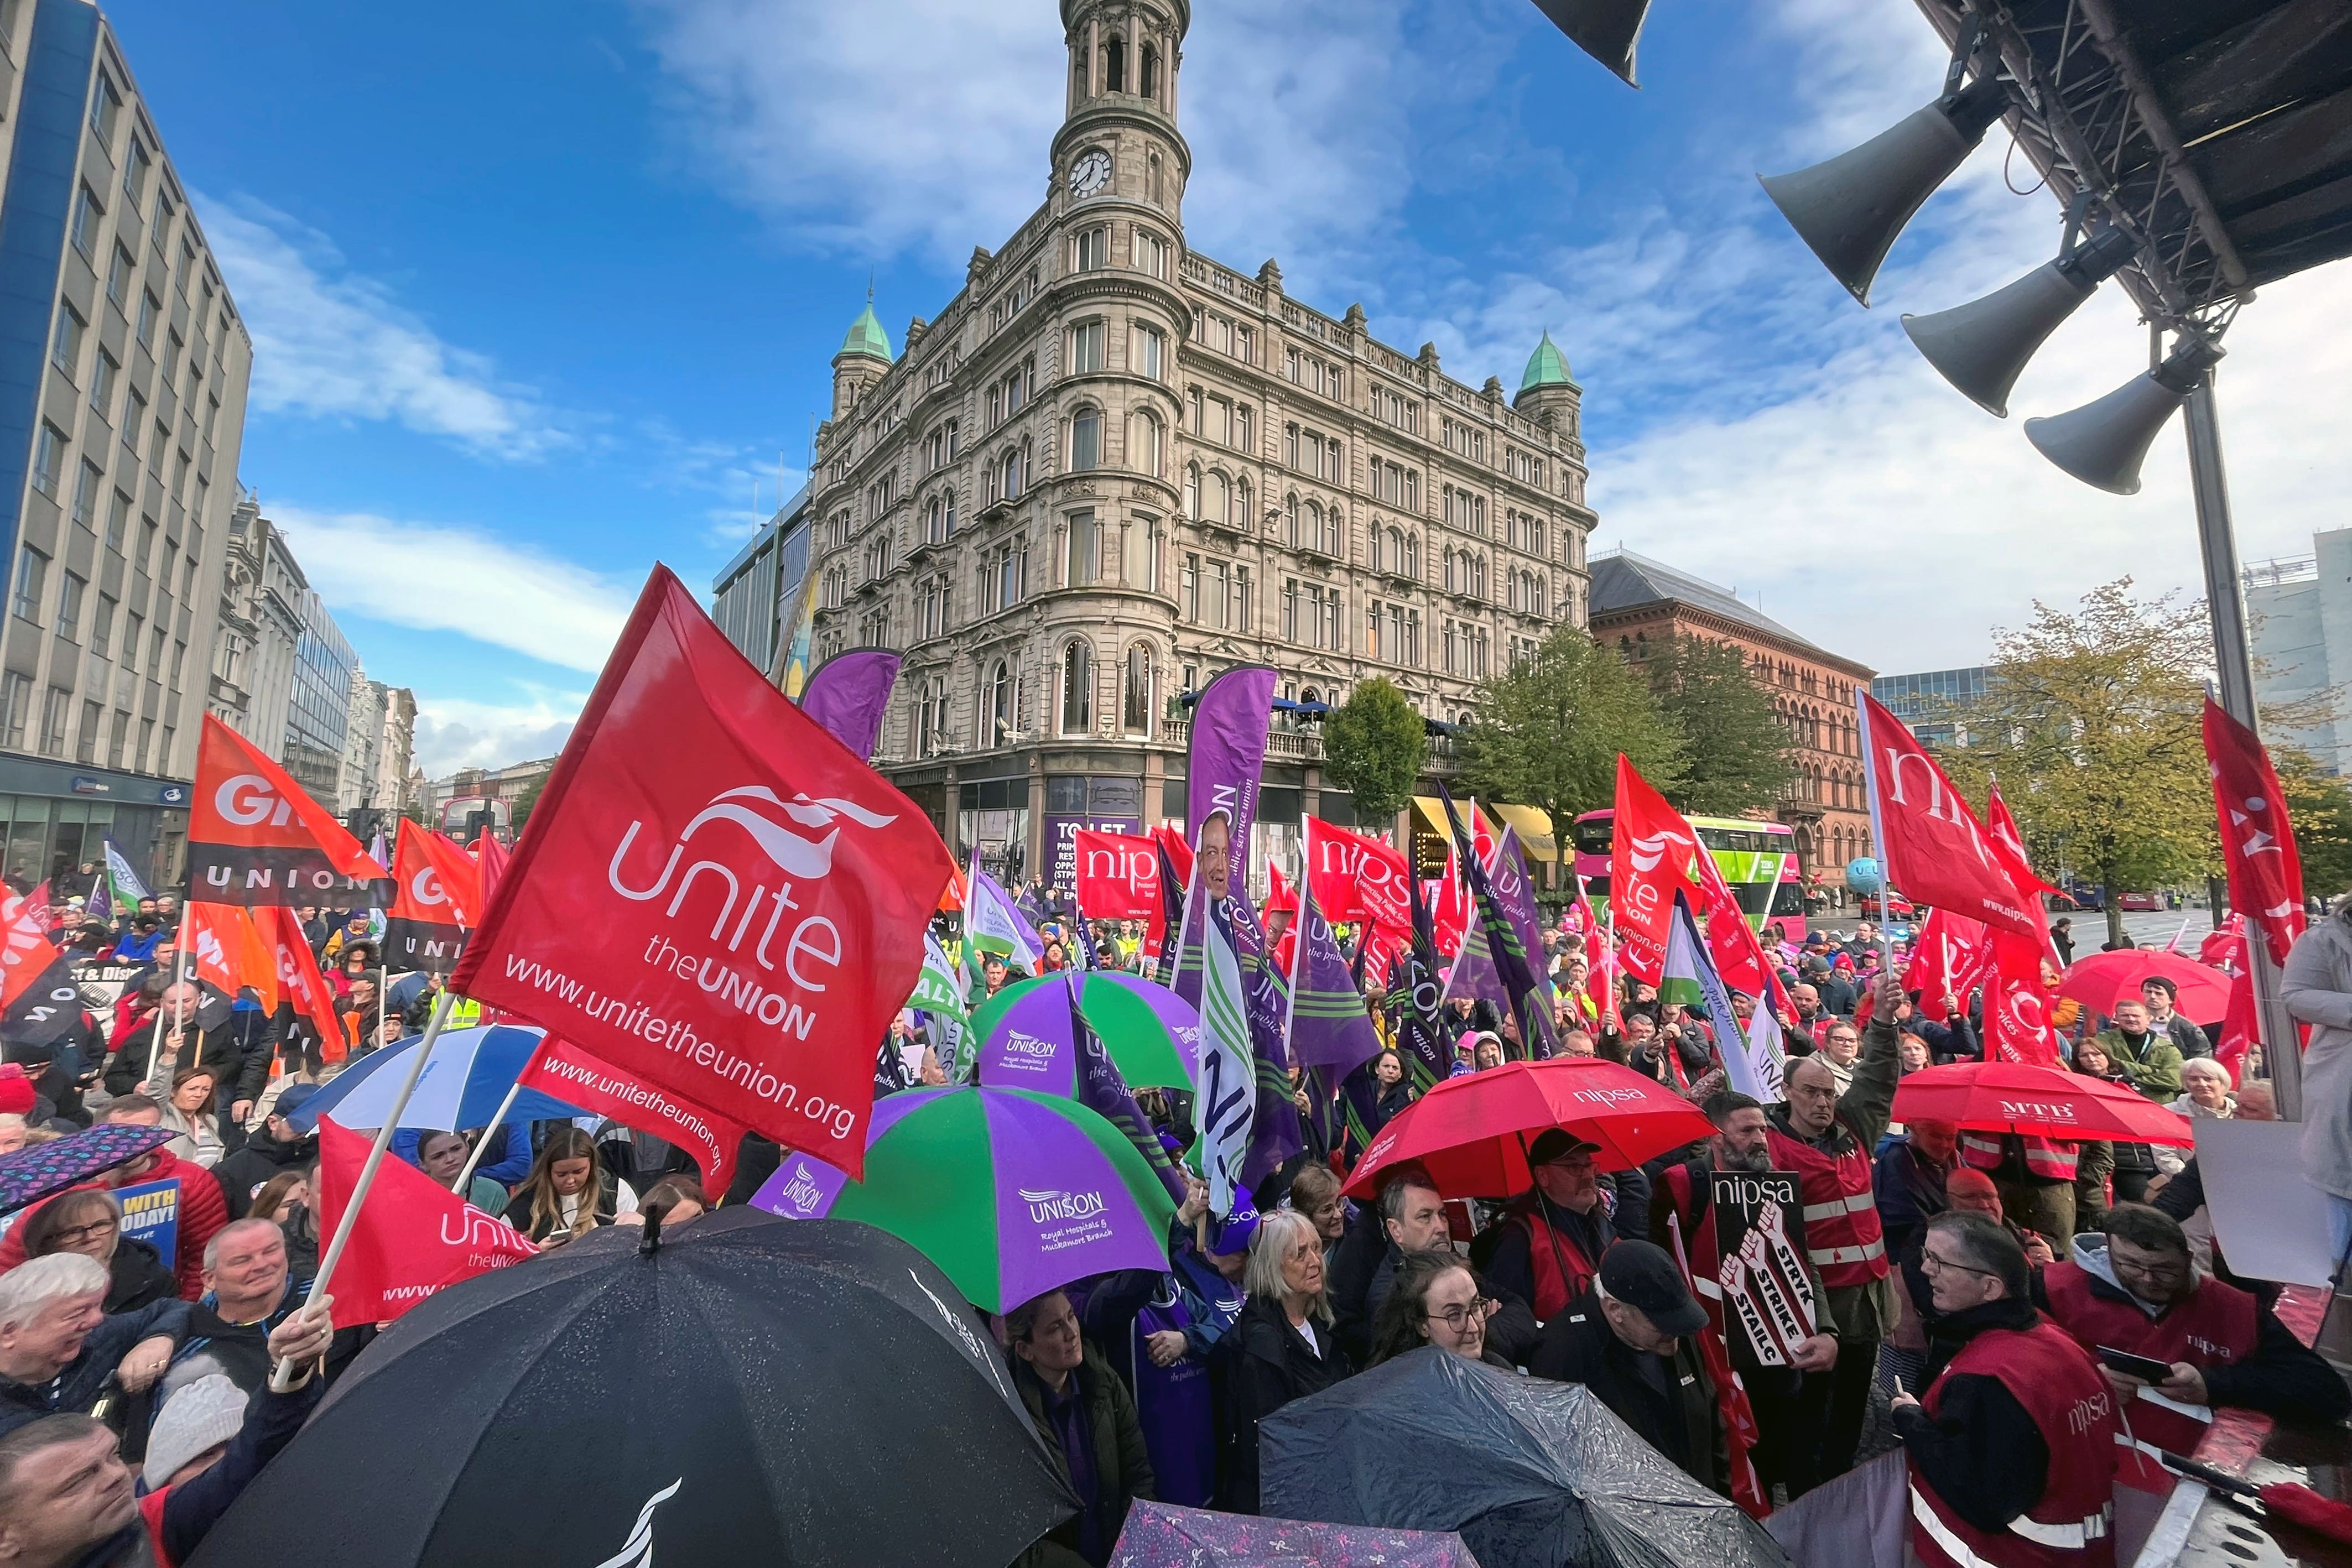 A major strike by public sector workers on Thursday is expected to be the largest seen in Northern Ireland in recent history (Claudia Savage/PA)